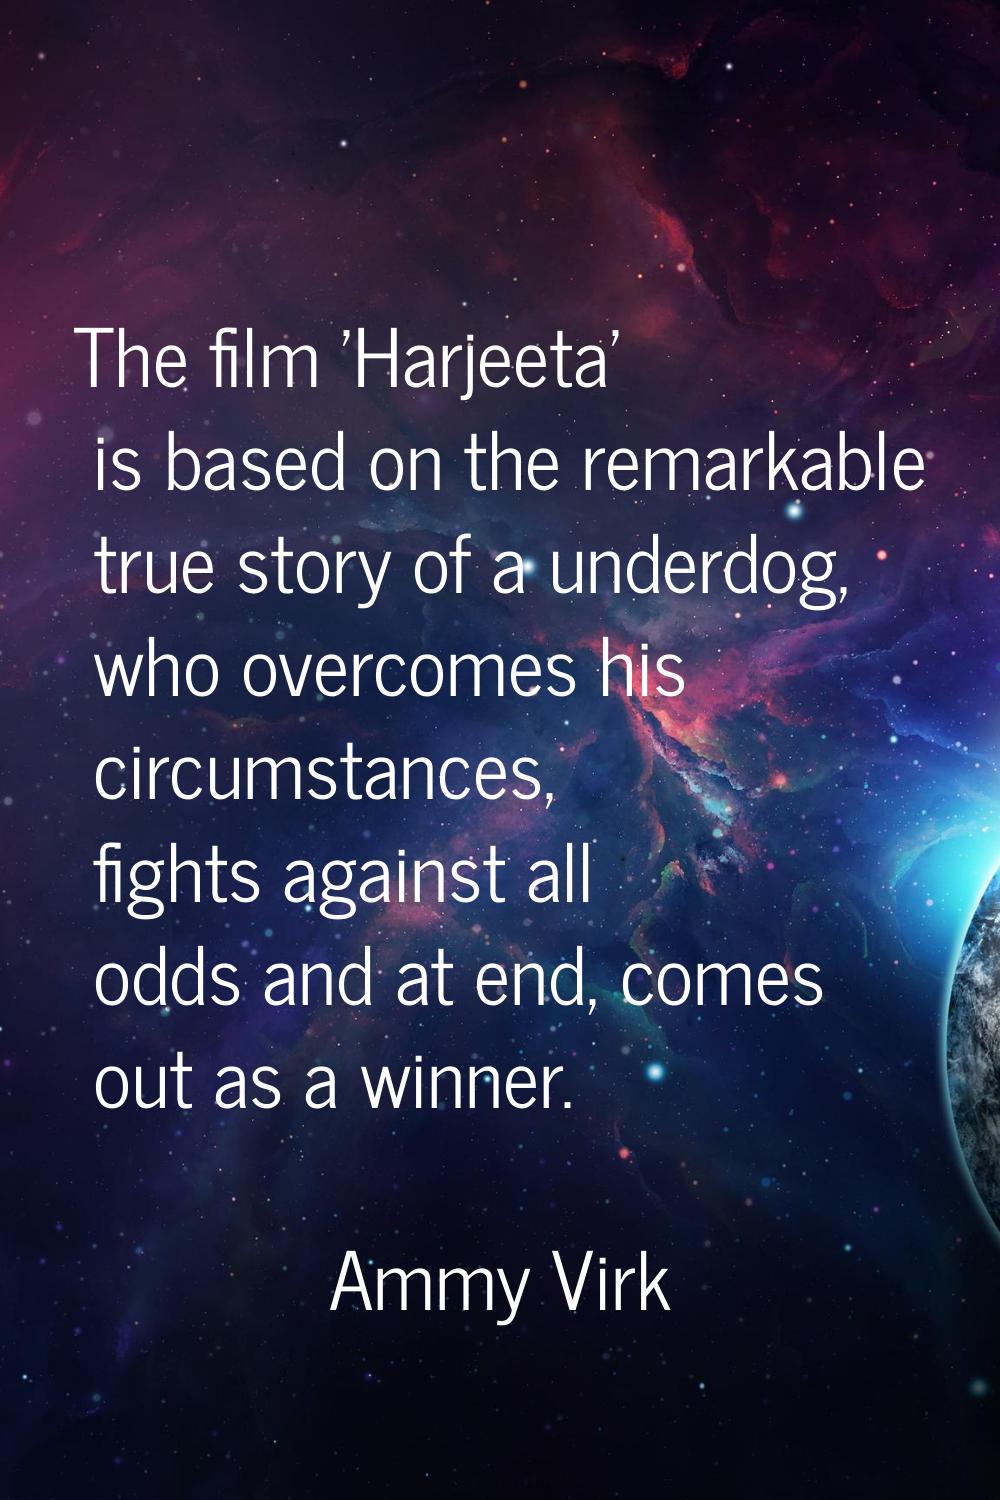 The film 'Harjeeta' is based on the remarkable true story of a underdog, who overcomes his circumst